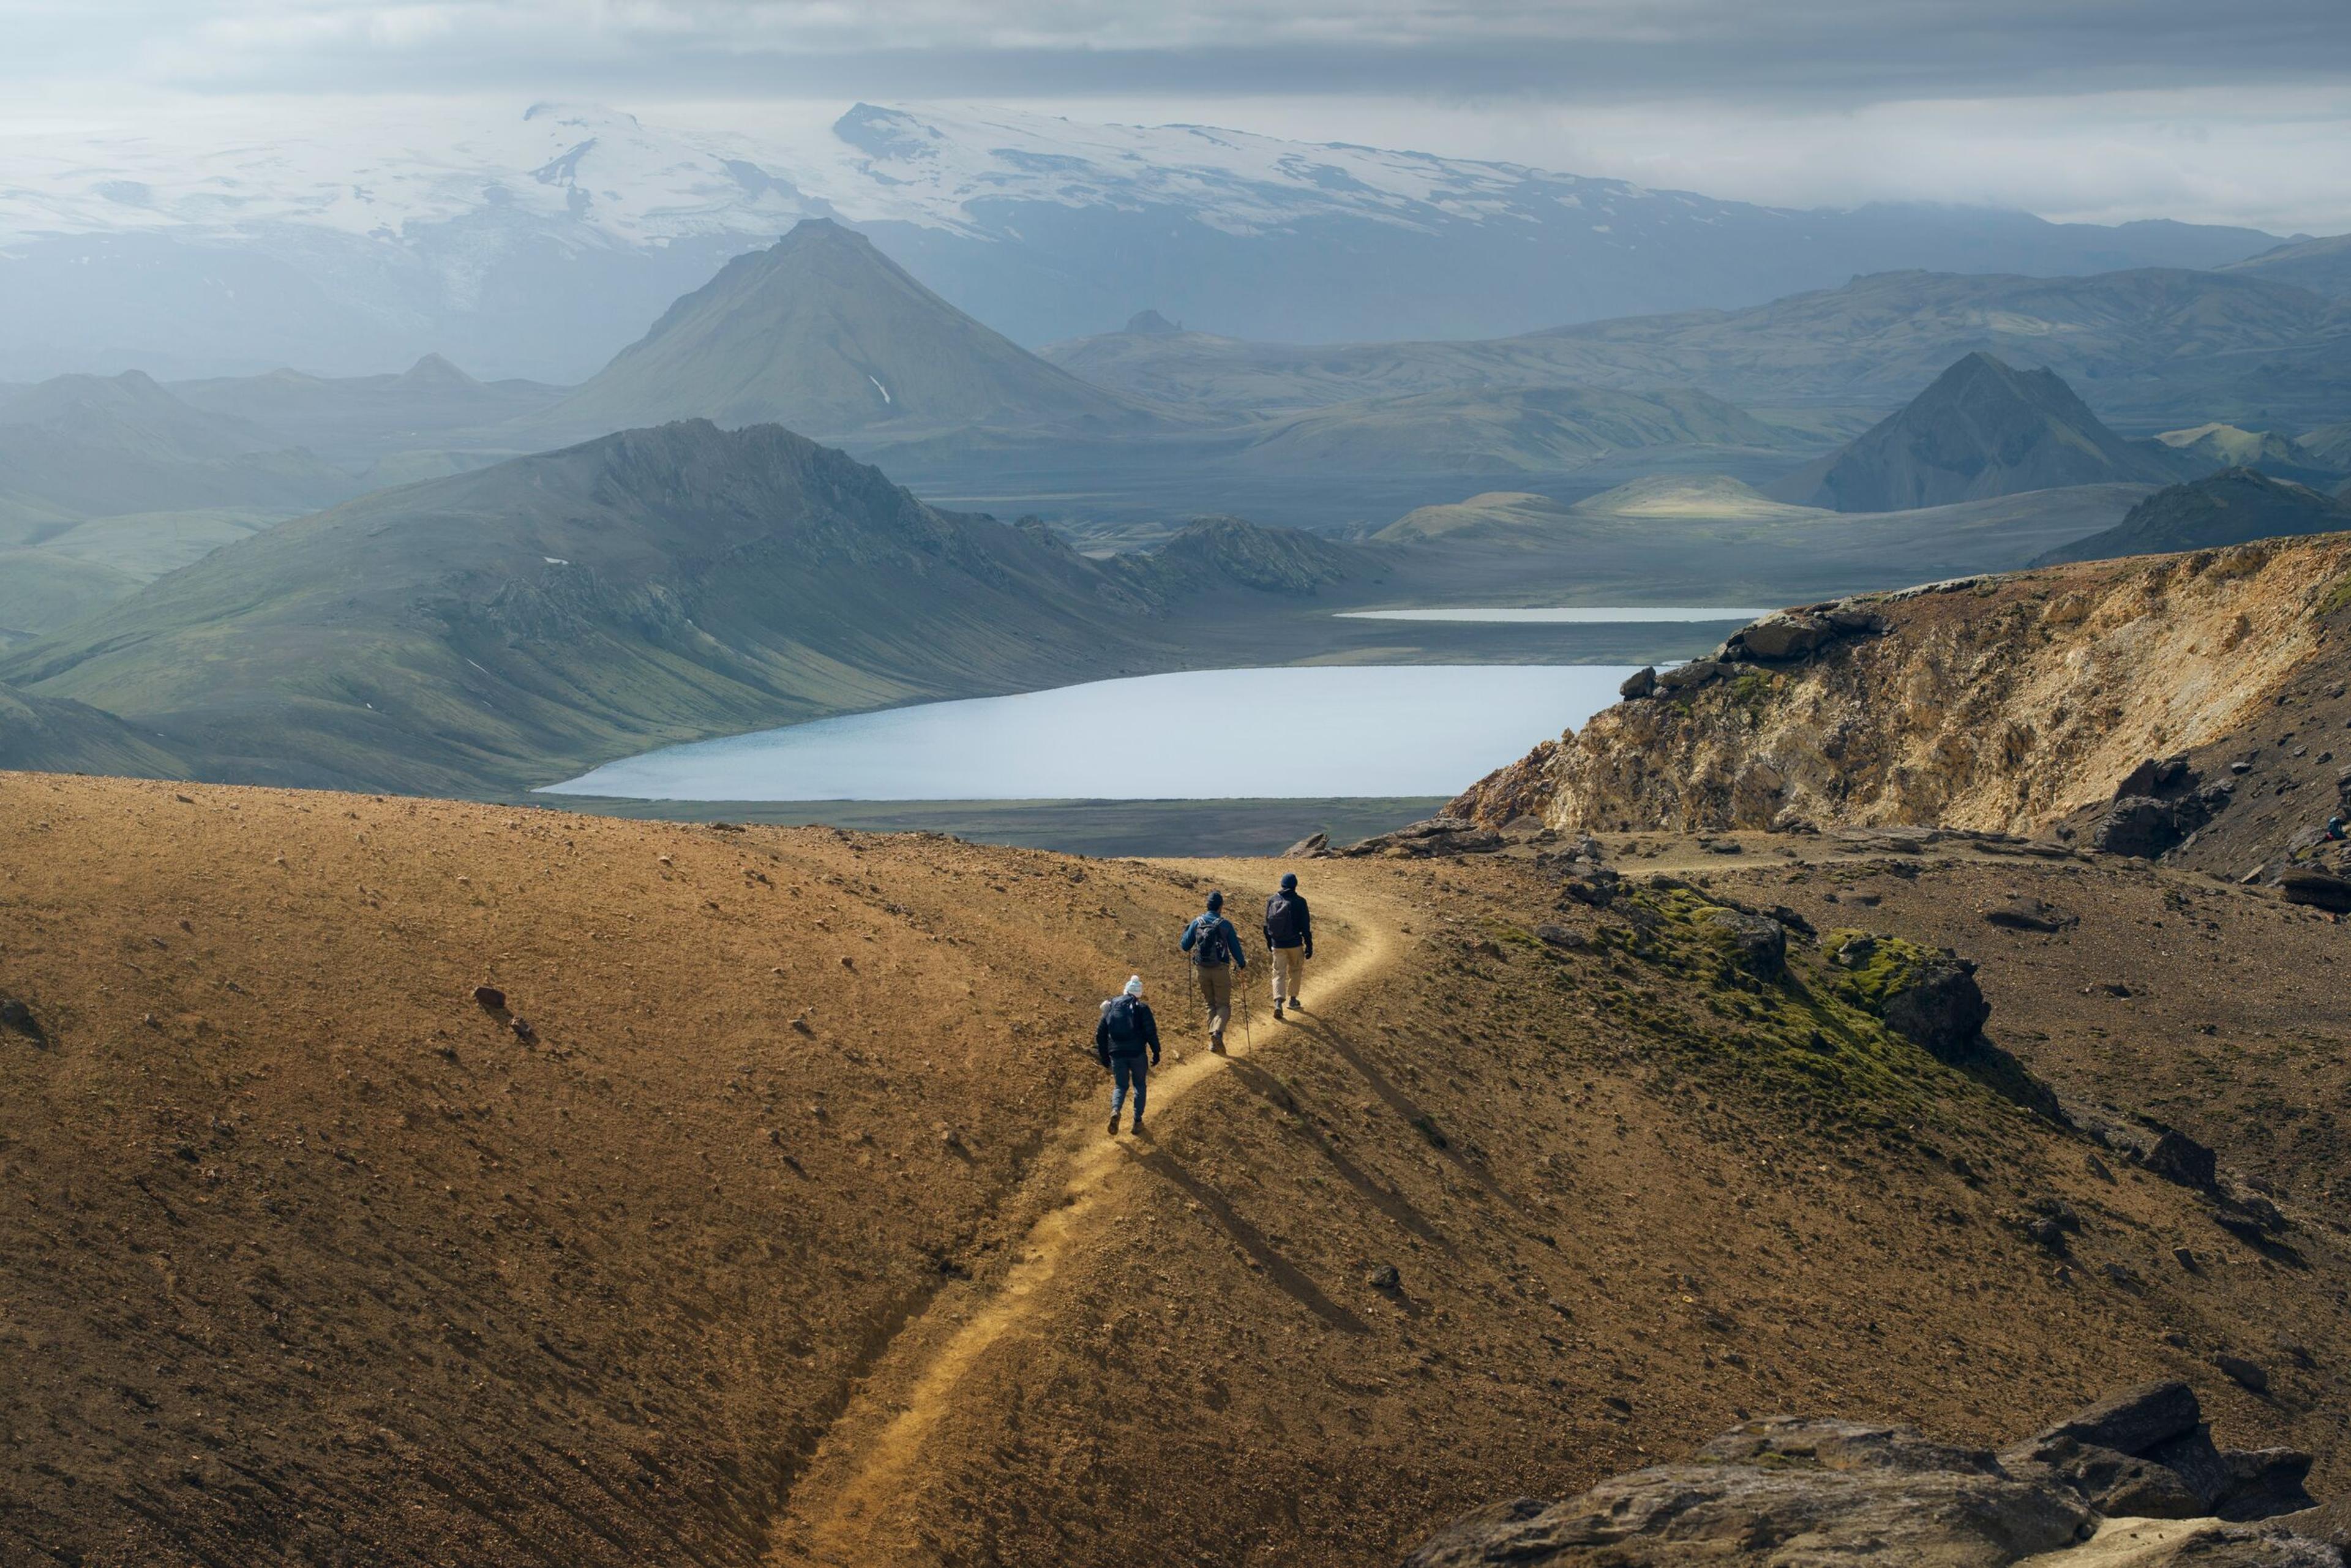 Hikers descending a trail on a rugged hillside with a panoramic view of a lake and mountainous landscape in the distance.